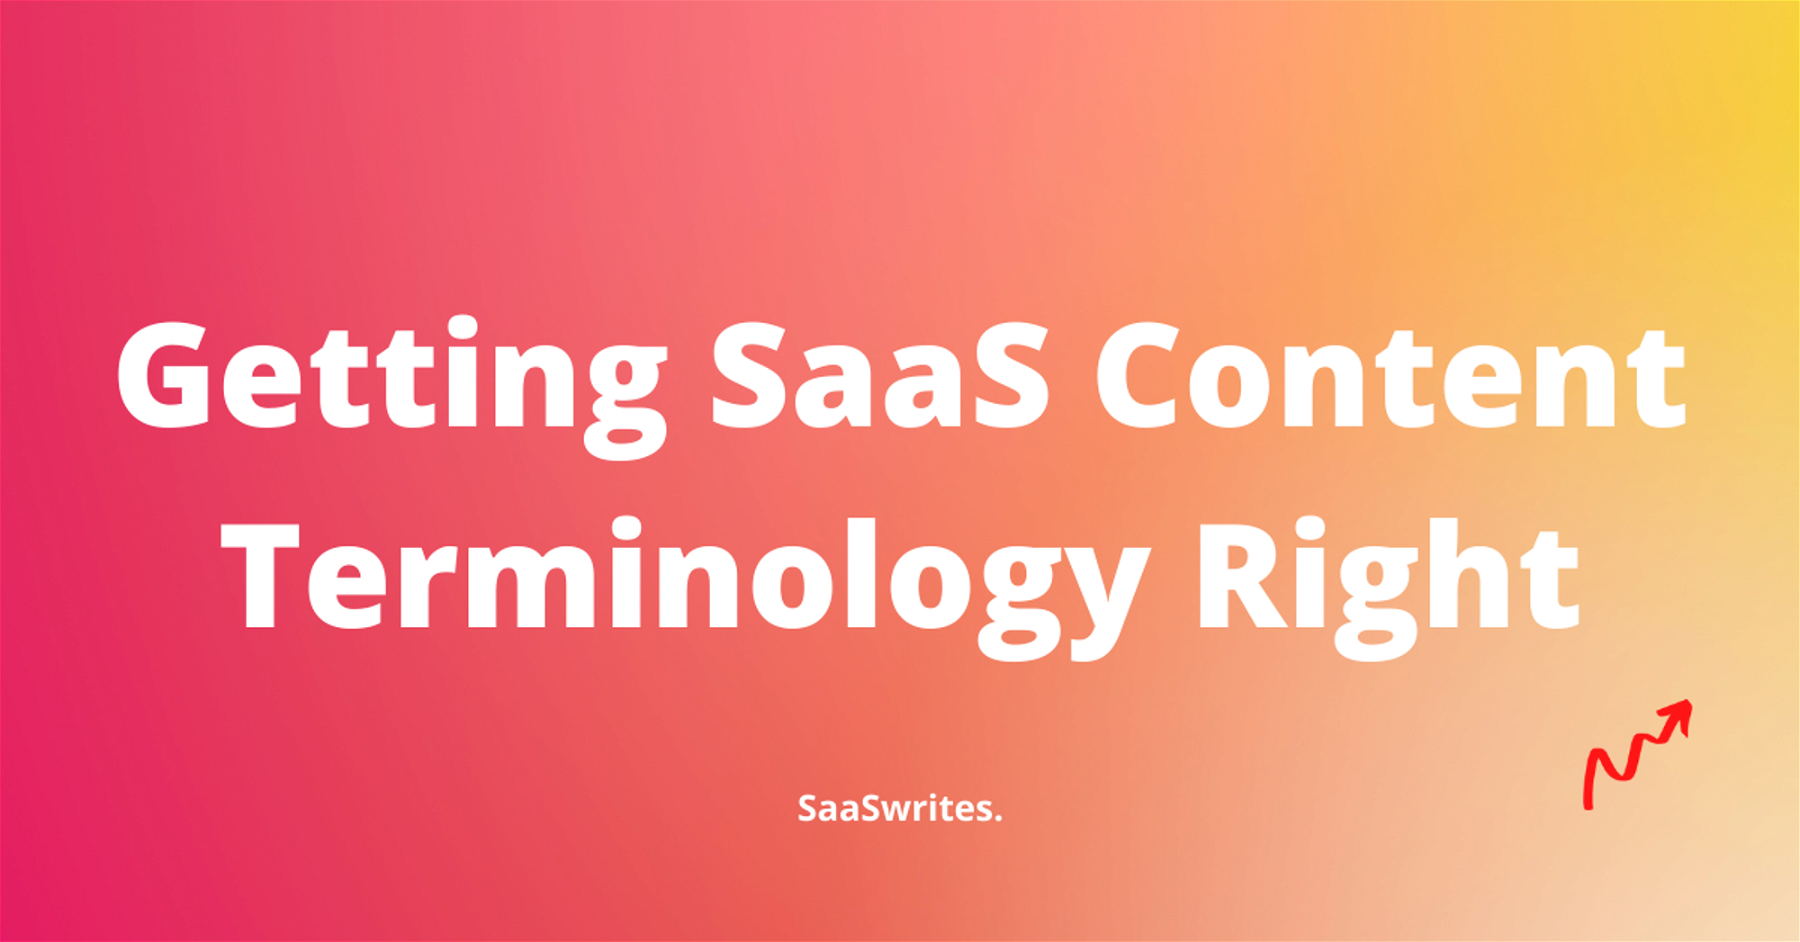 Understanding the content terminology as a SaaS founder